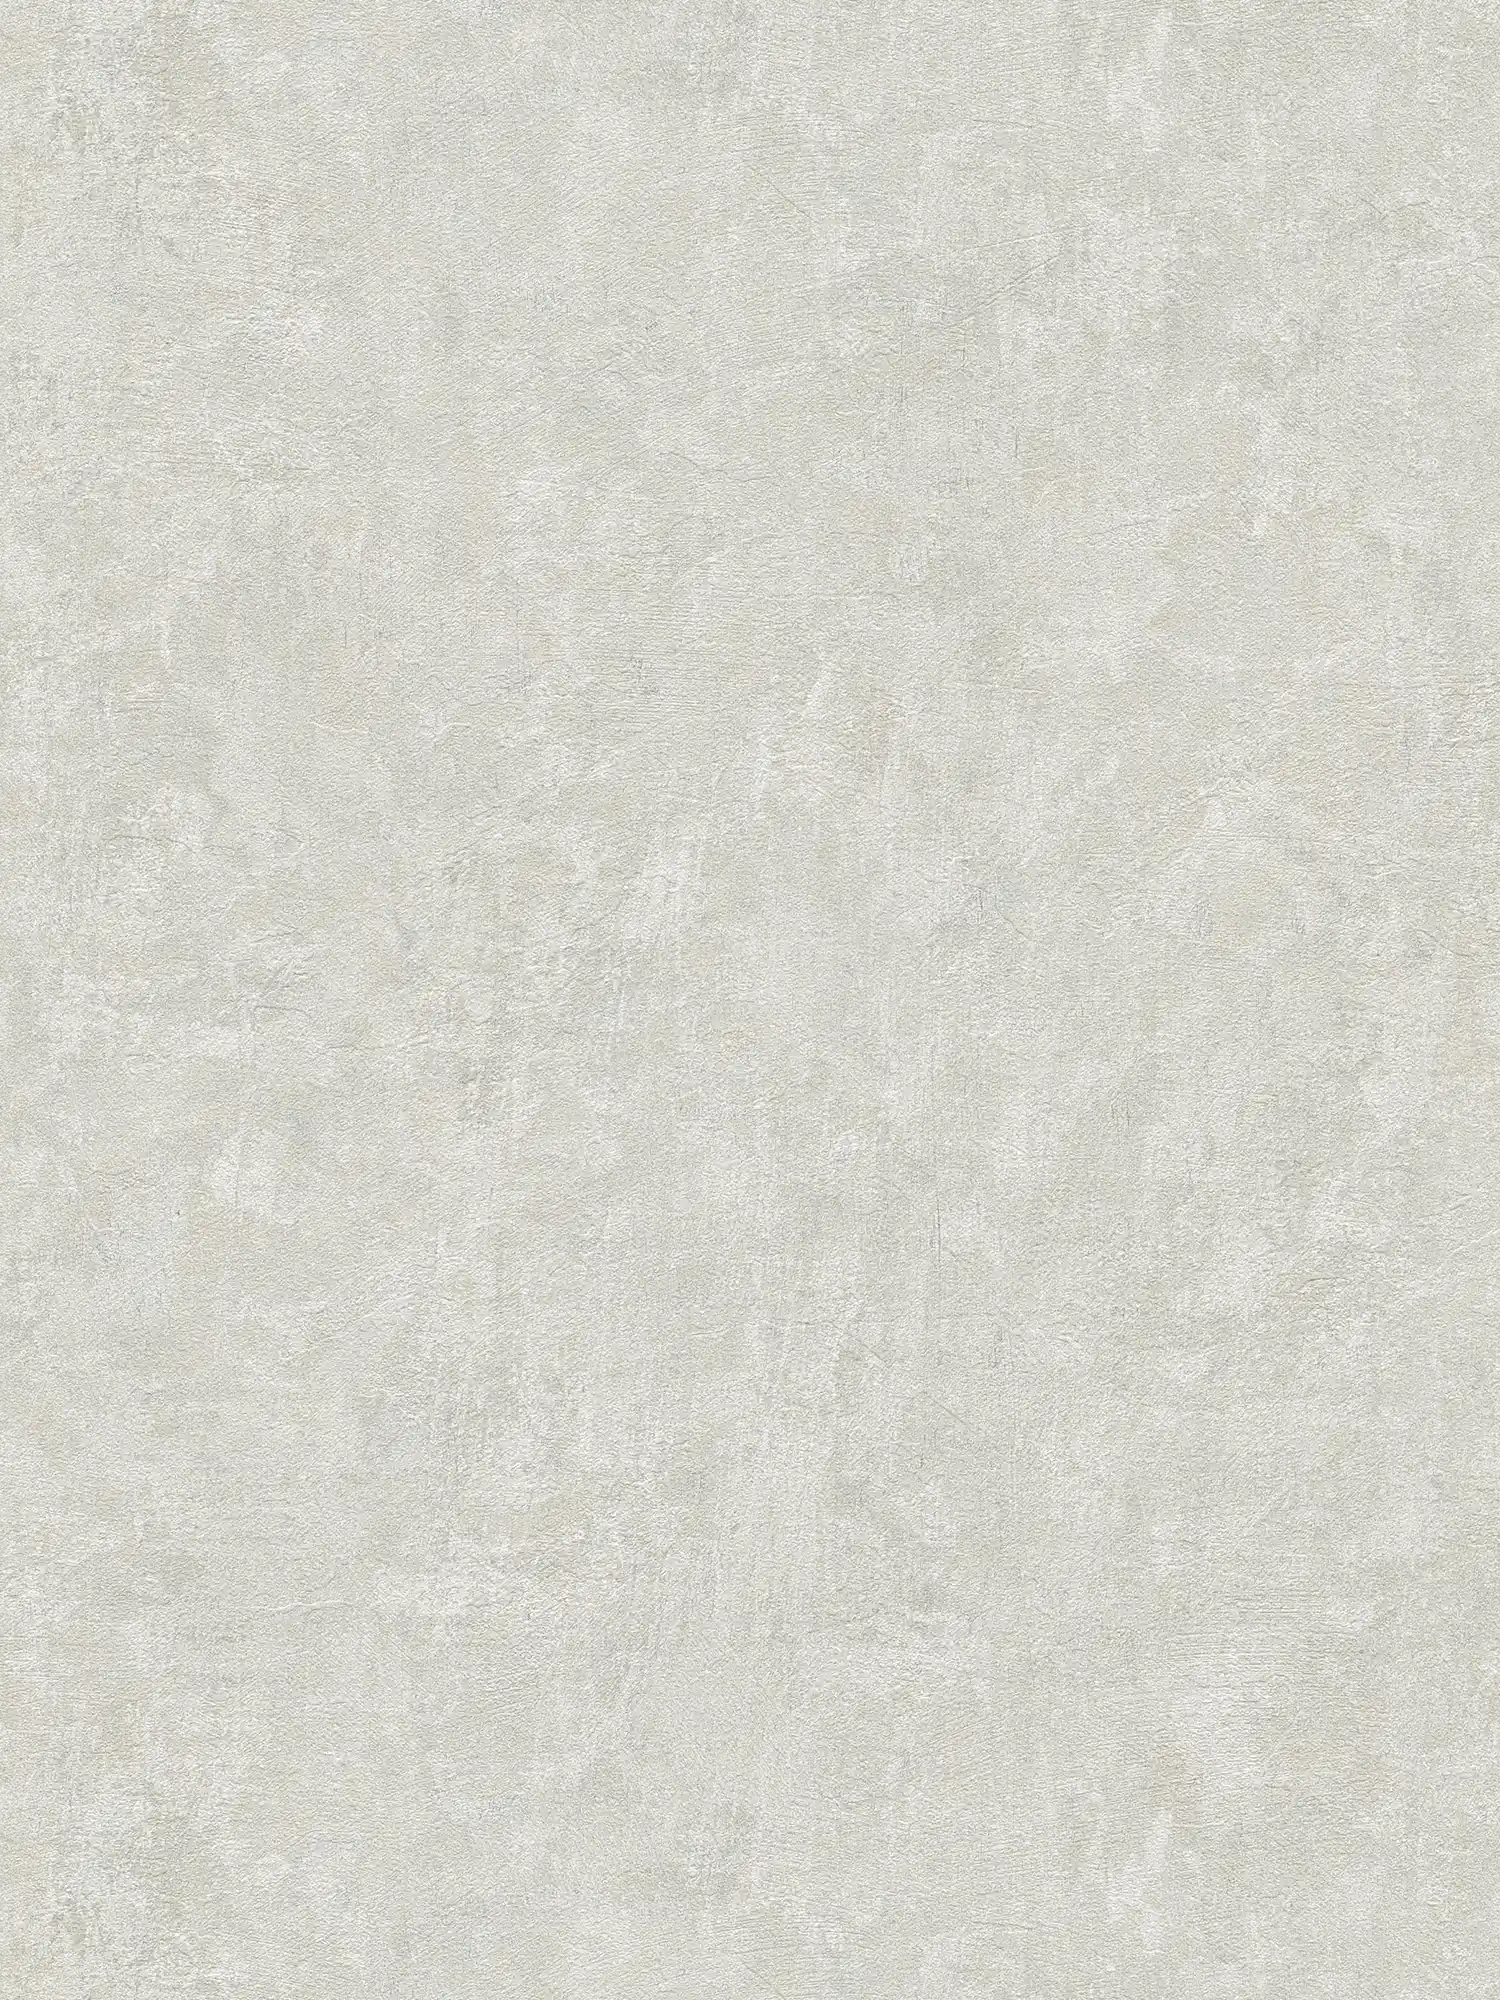             Wallpaper with plain textured pattern PVC-free - Grey
        